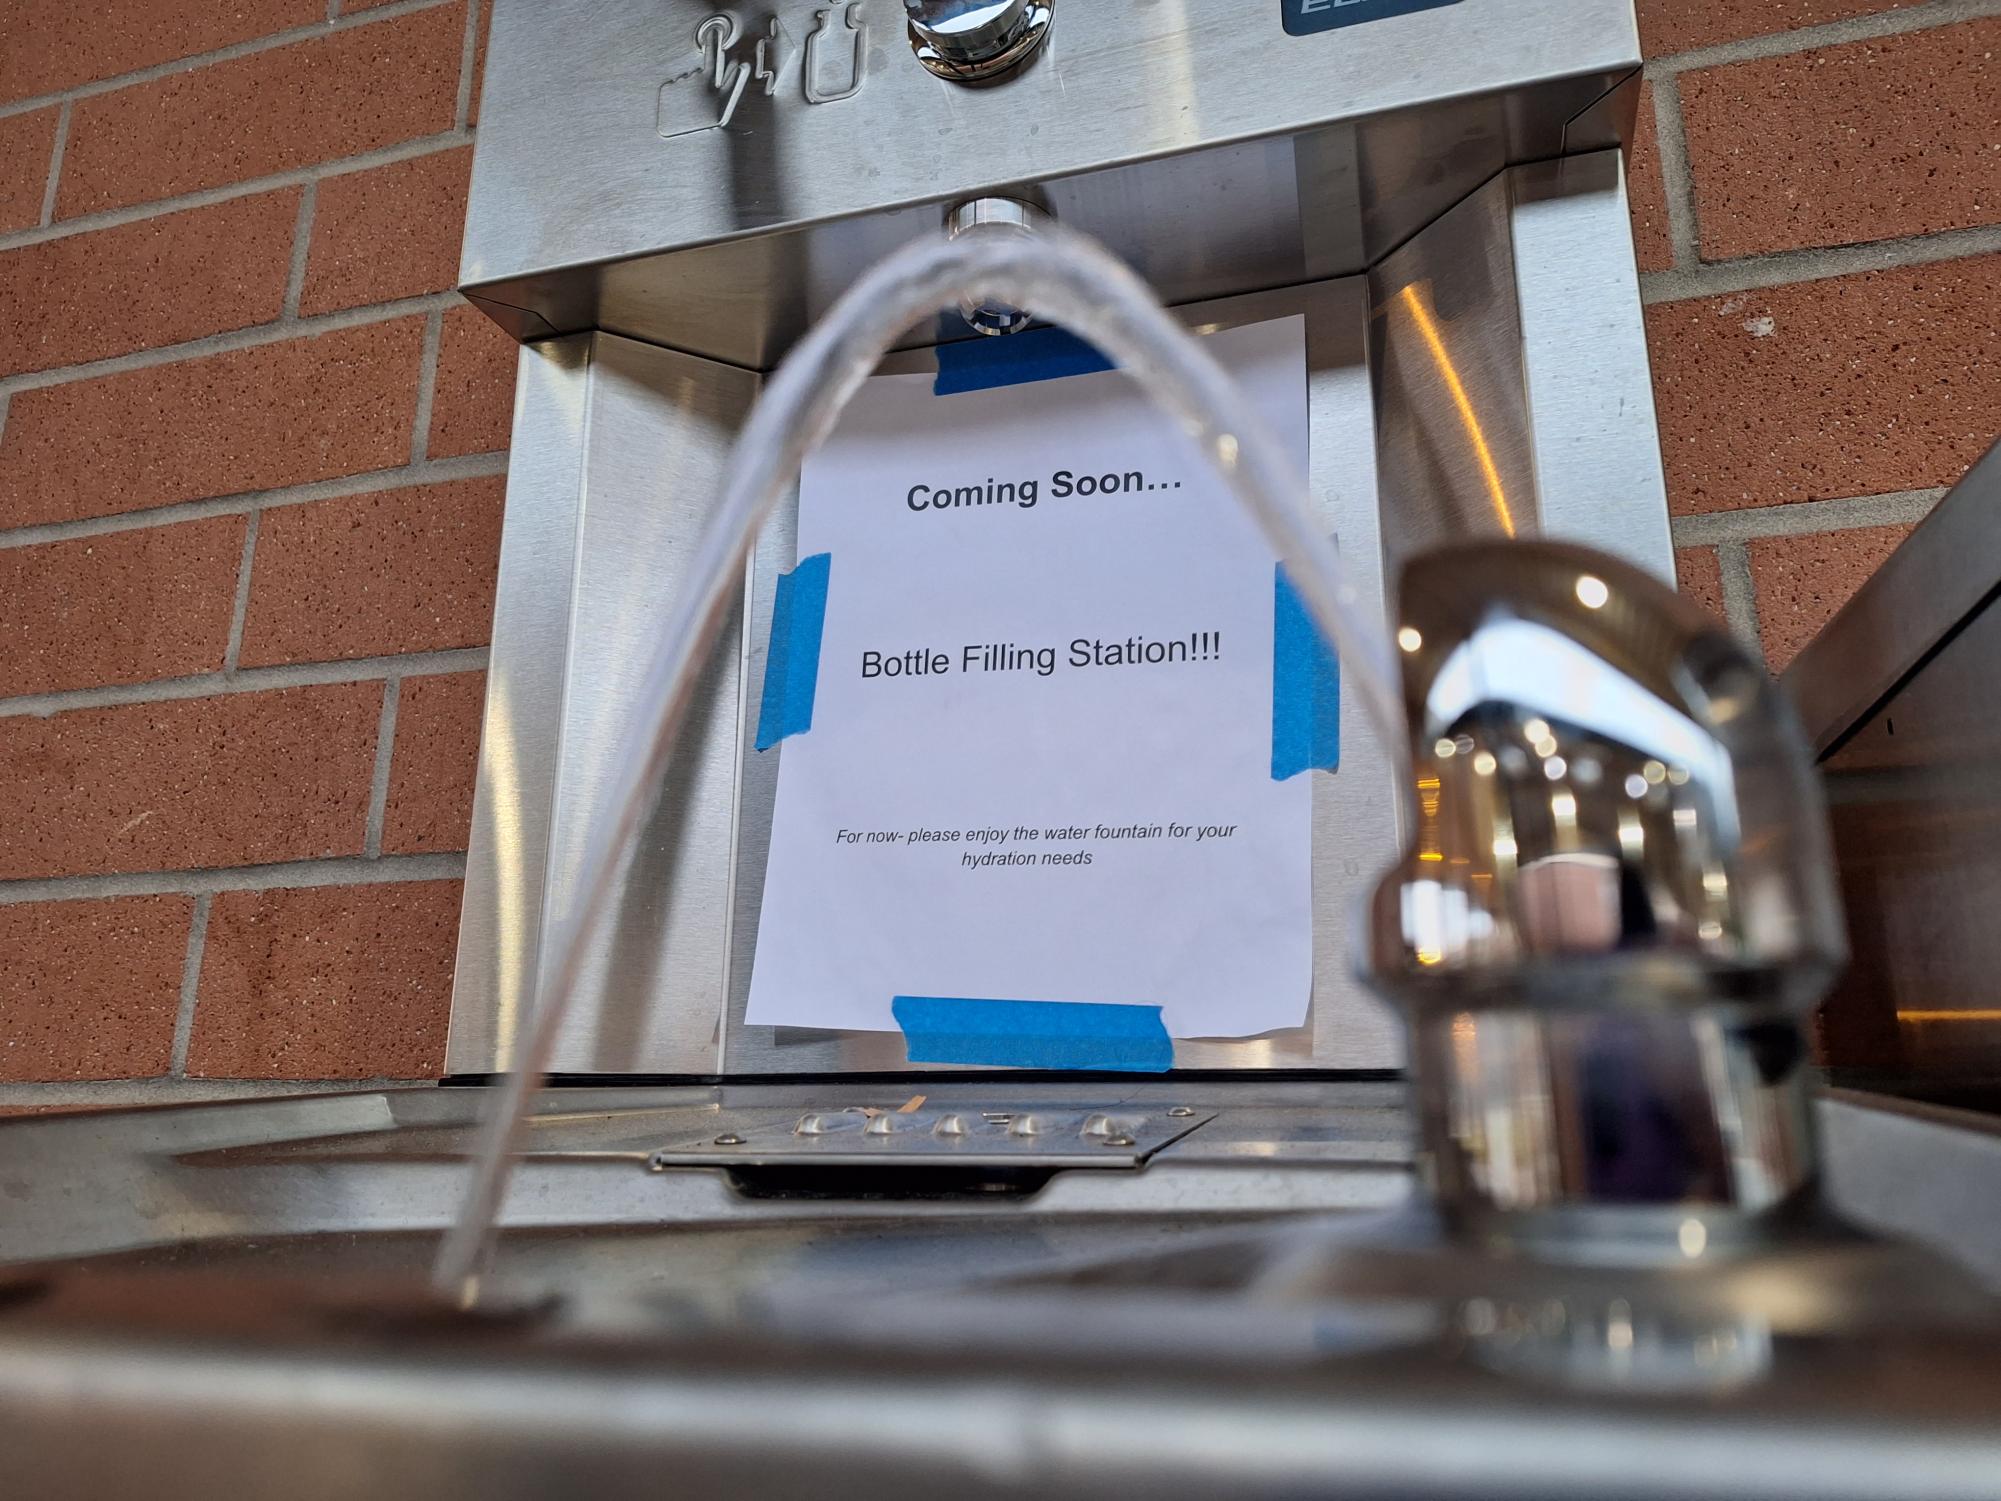 A splash of joy: GBHS gets new water fountains